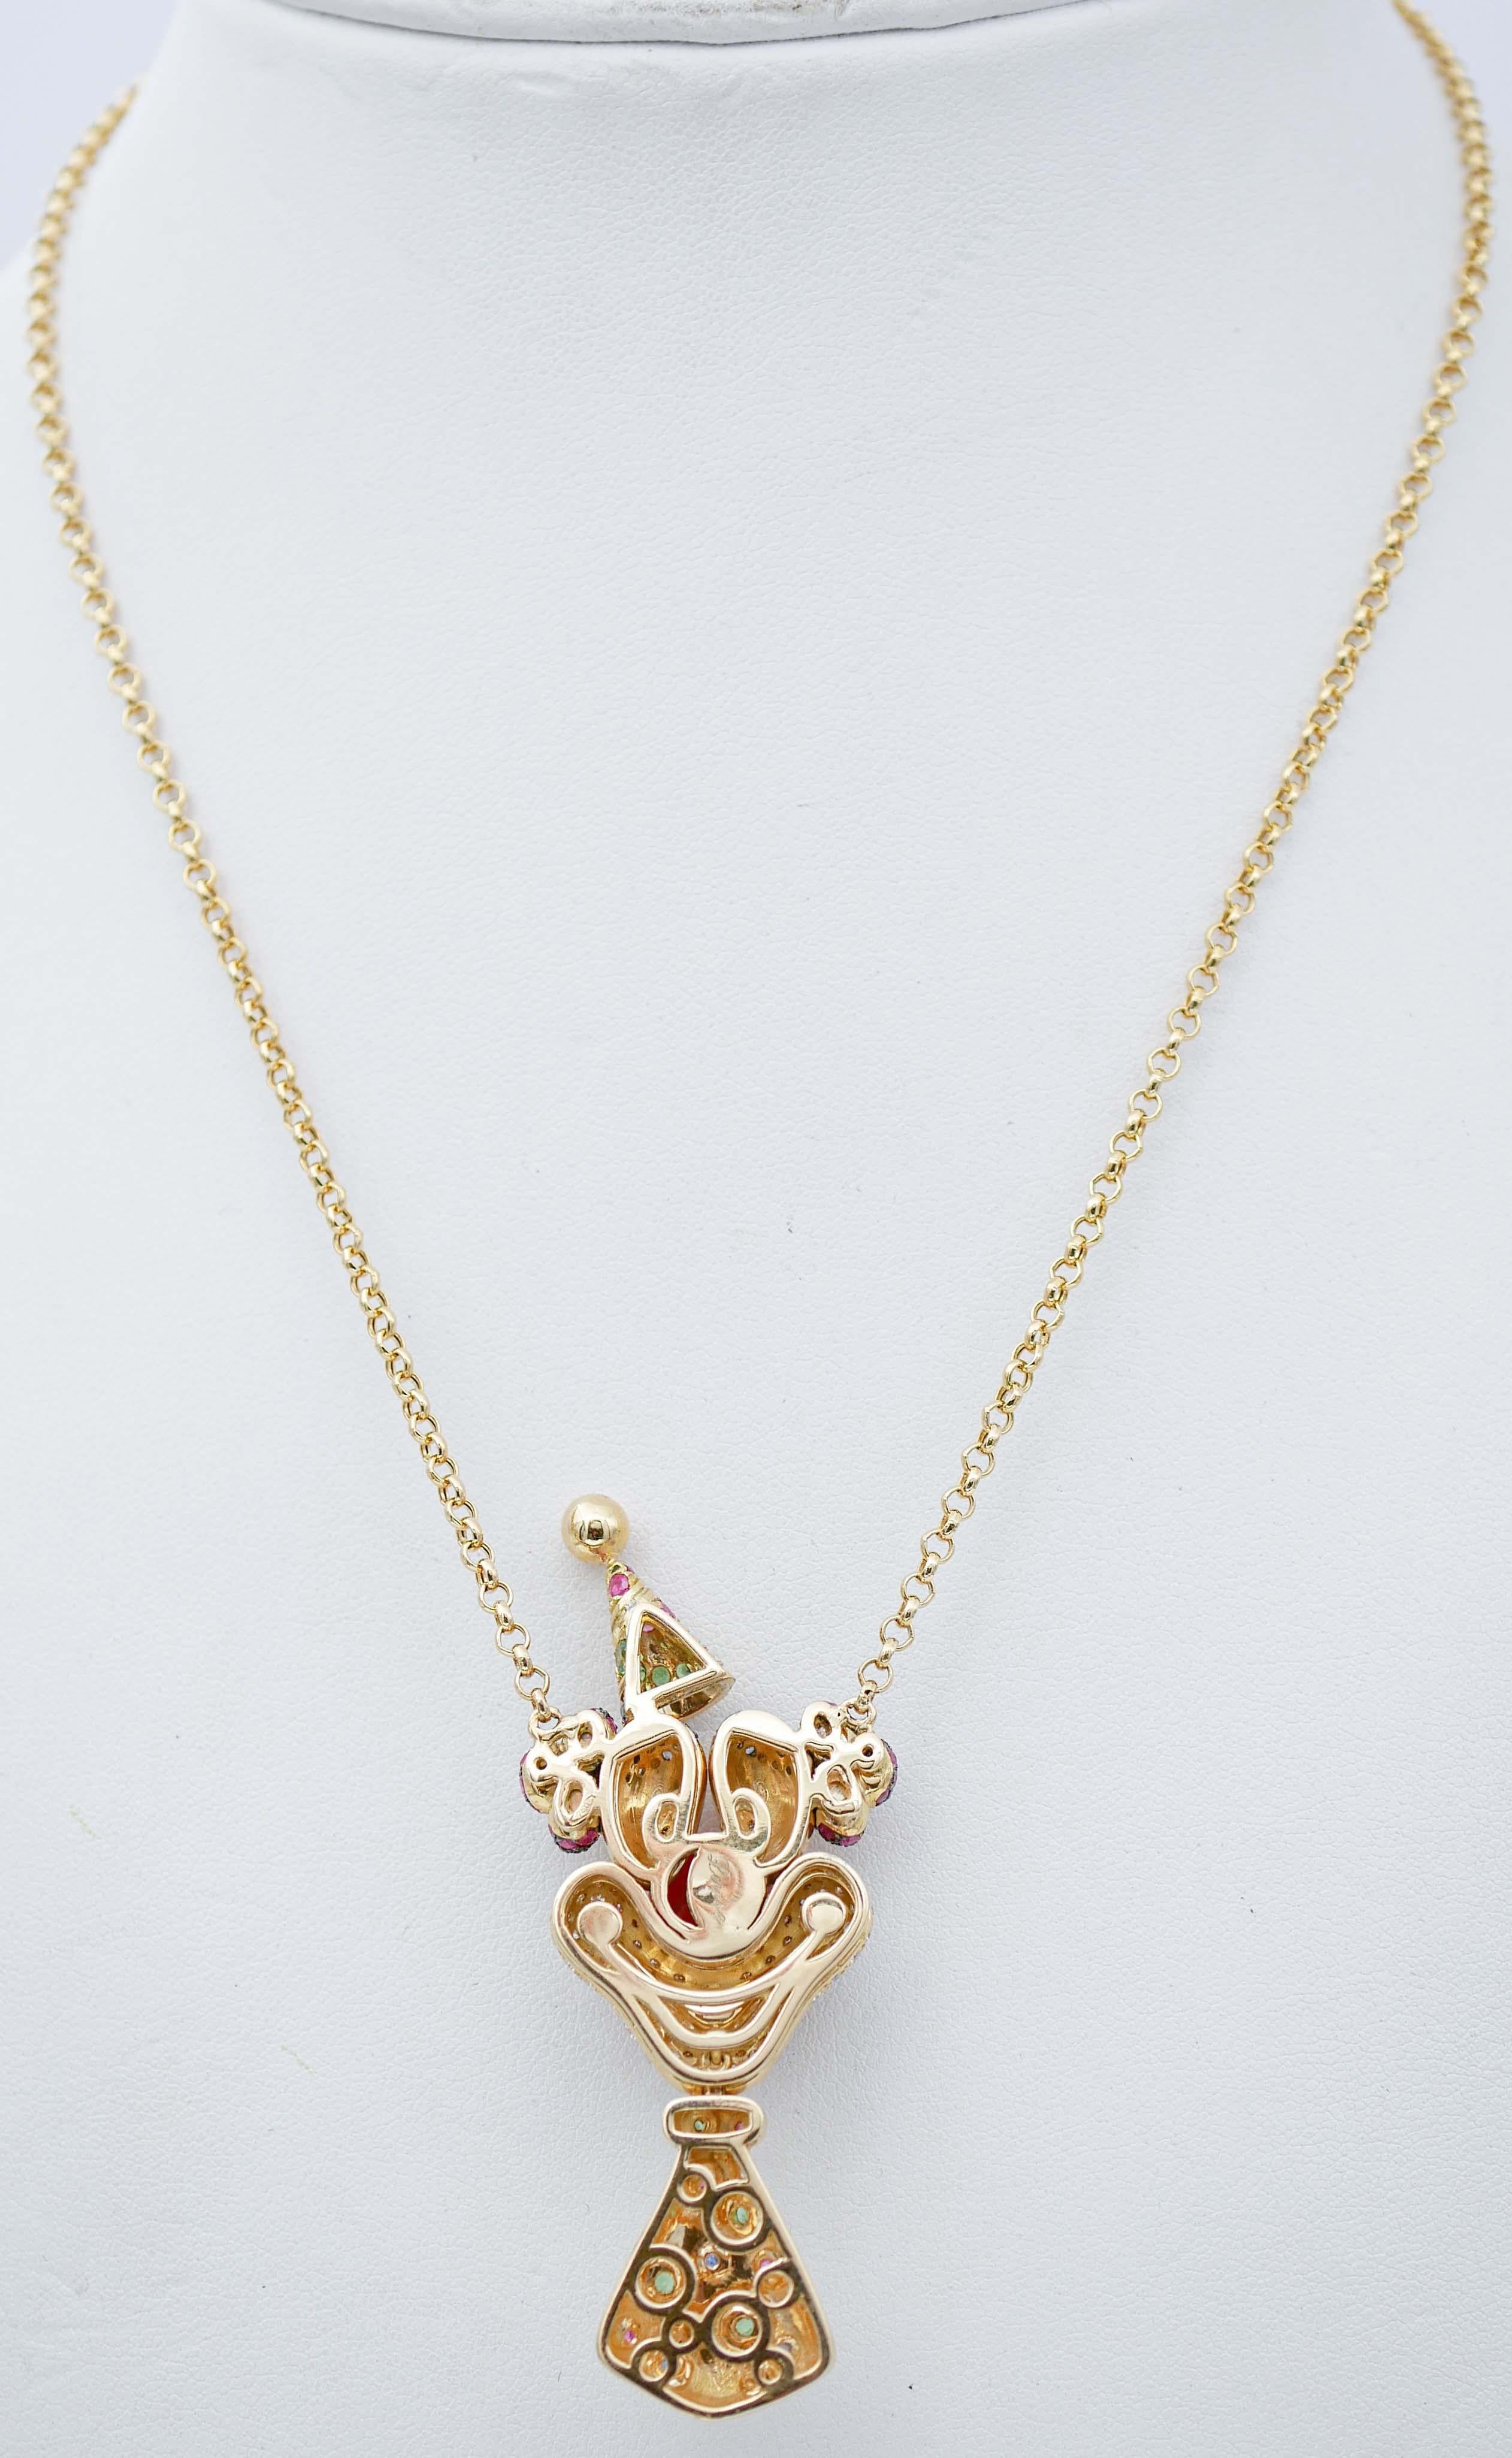 clown necklace gold